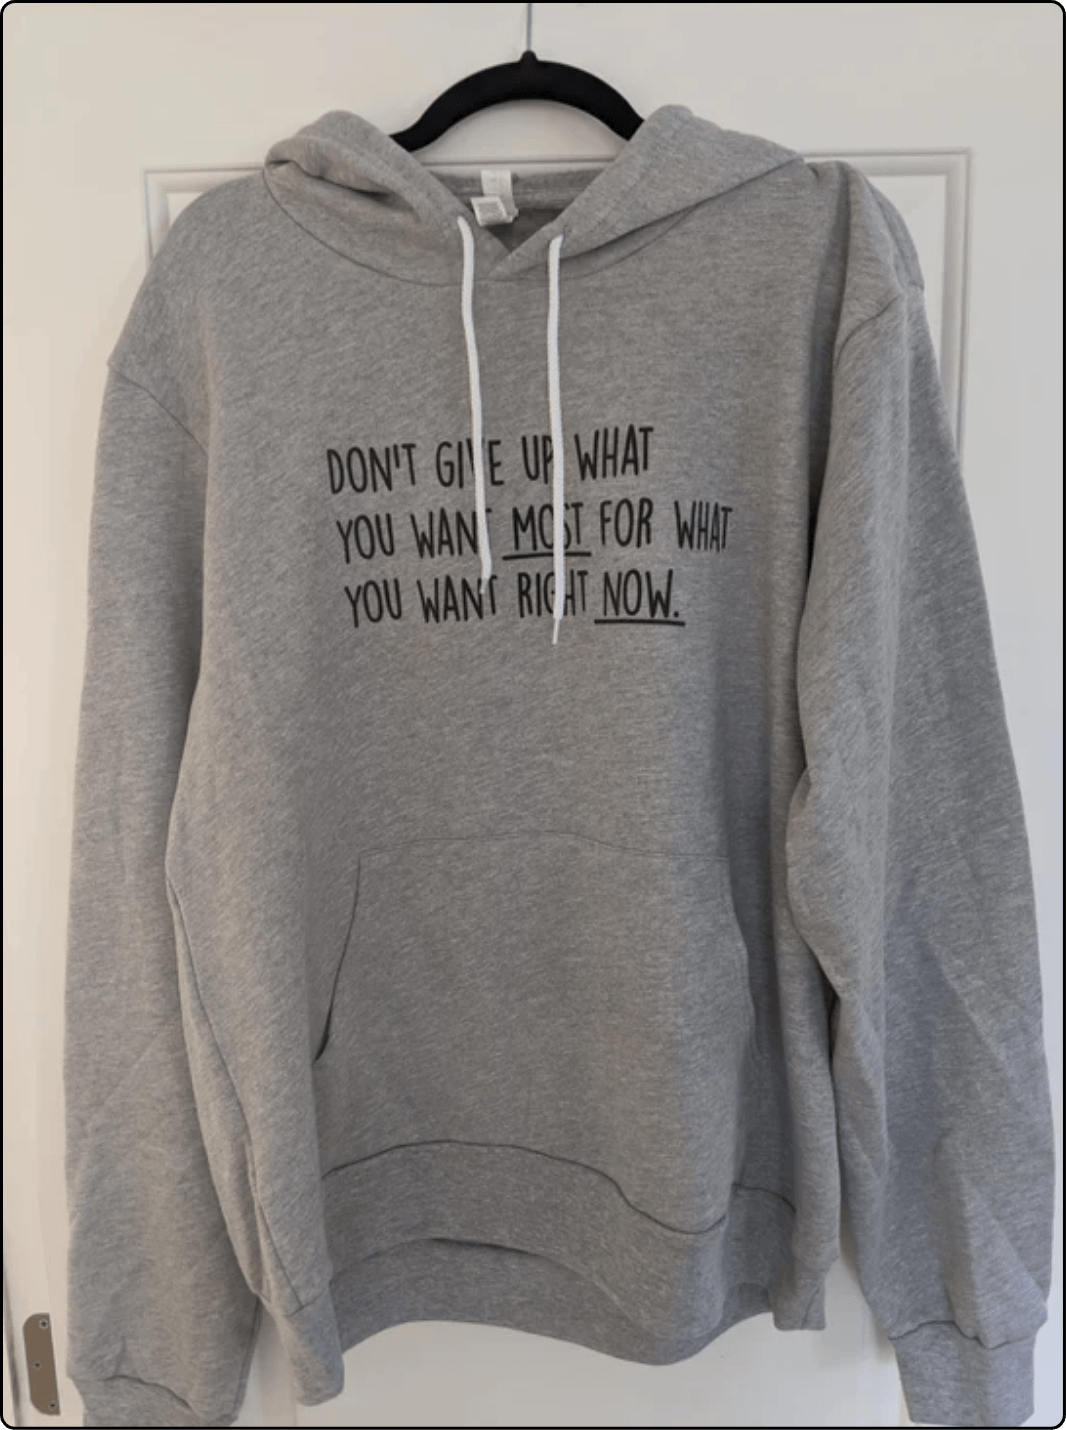 “Don’t give up” Hoodie